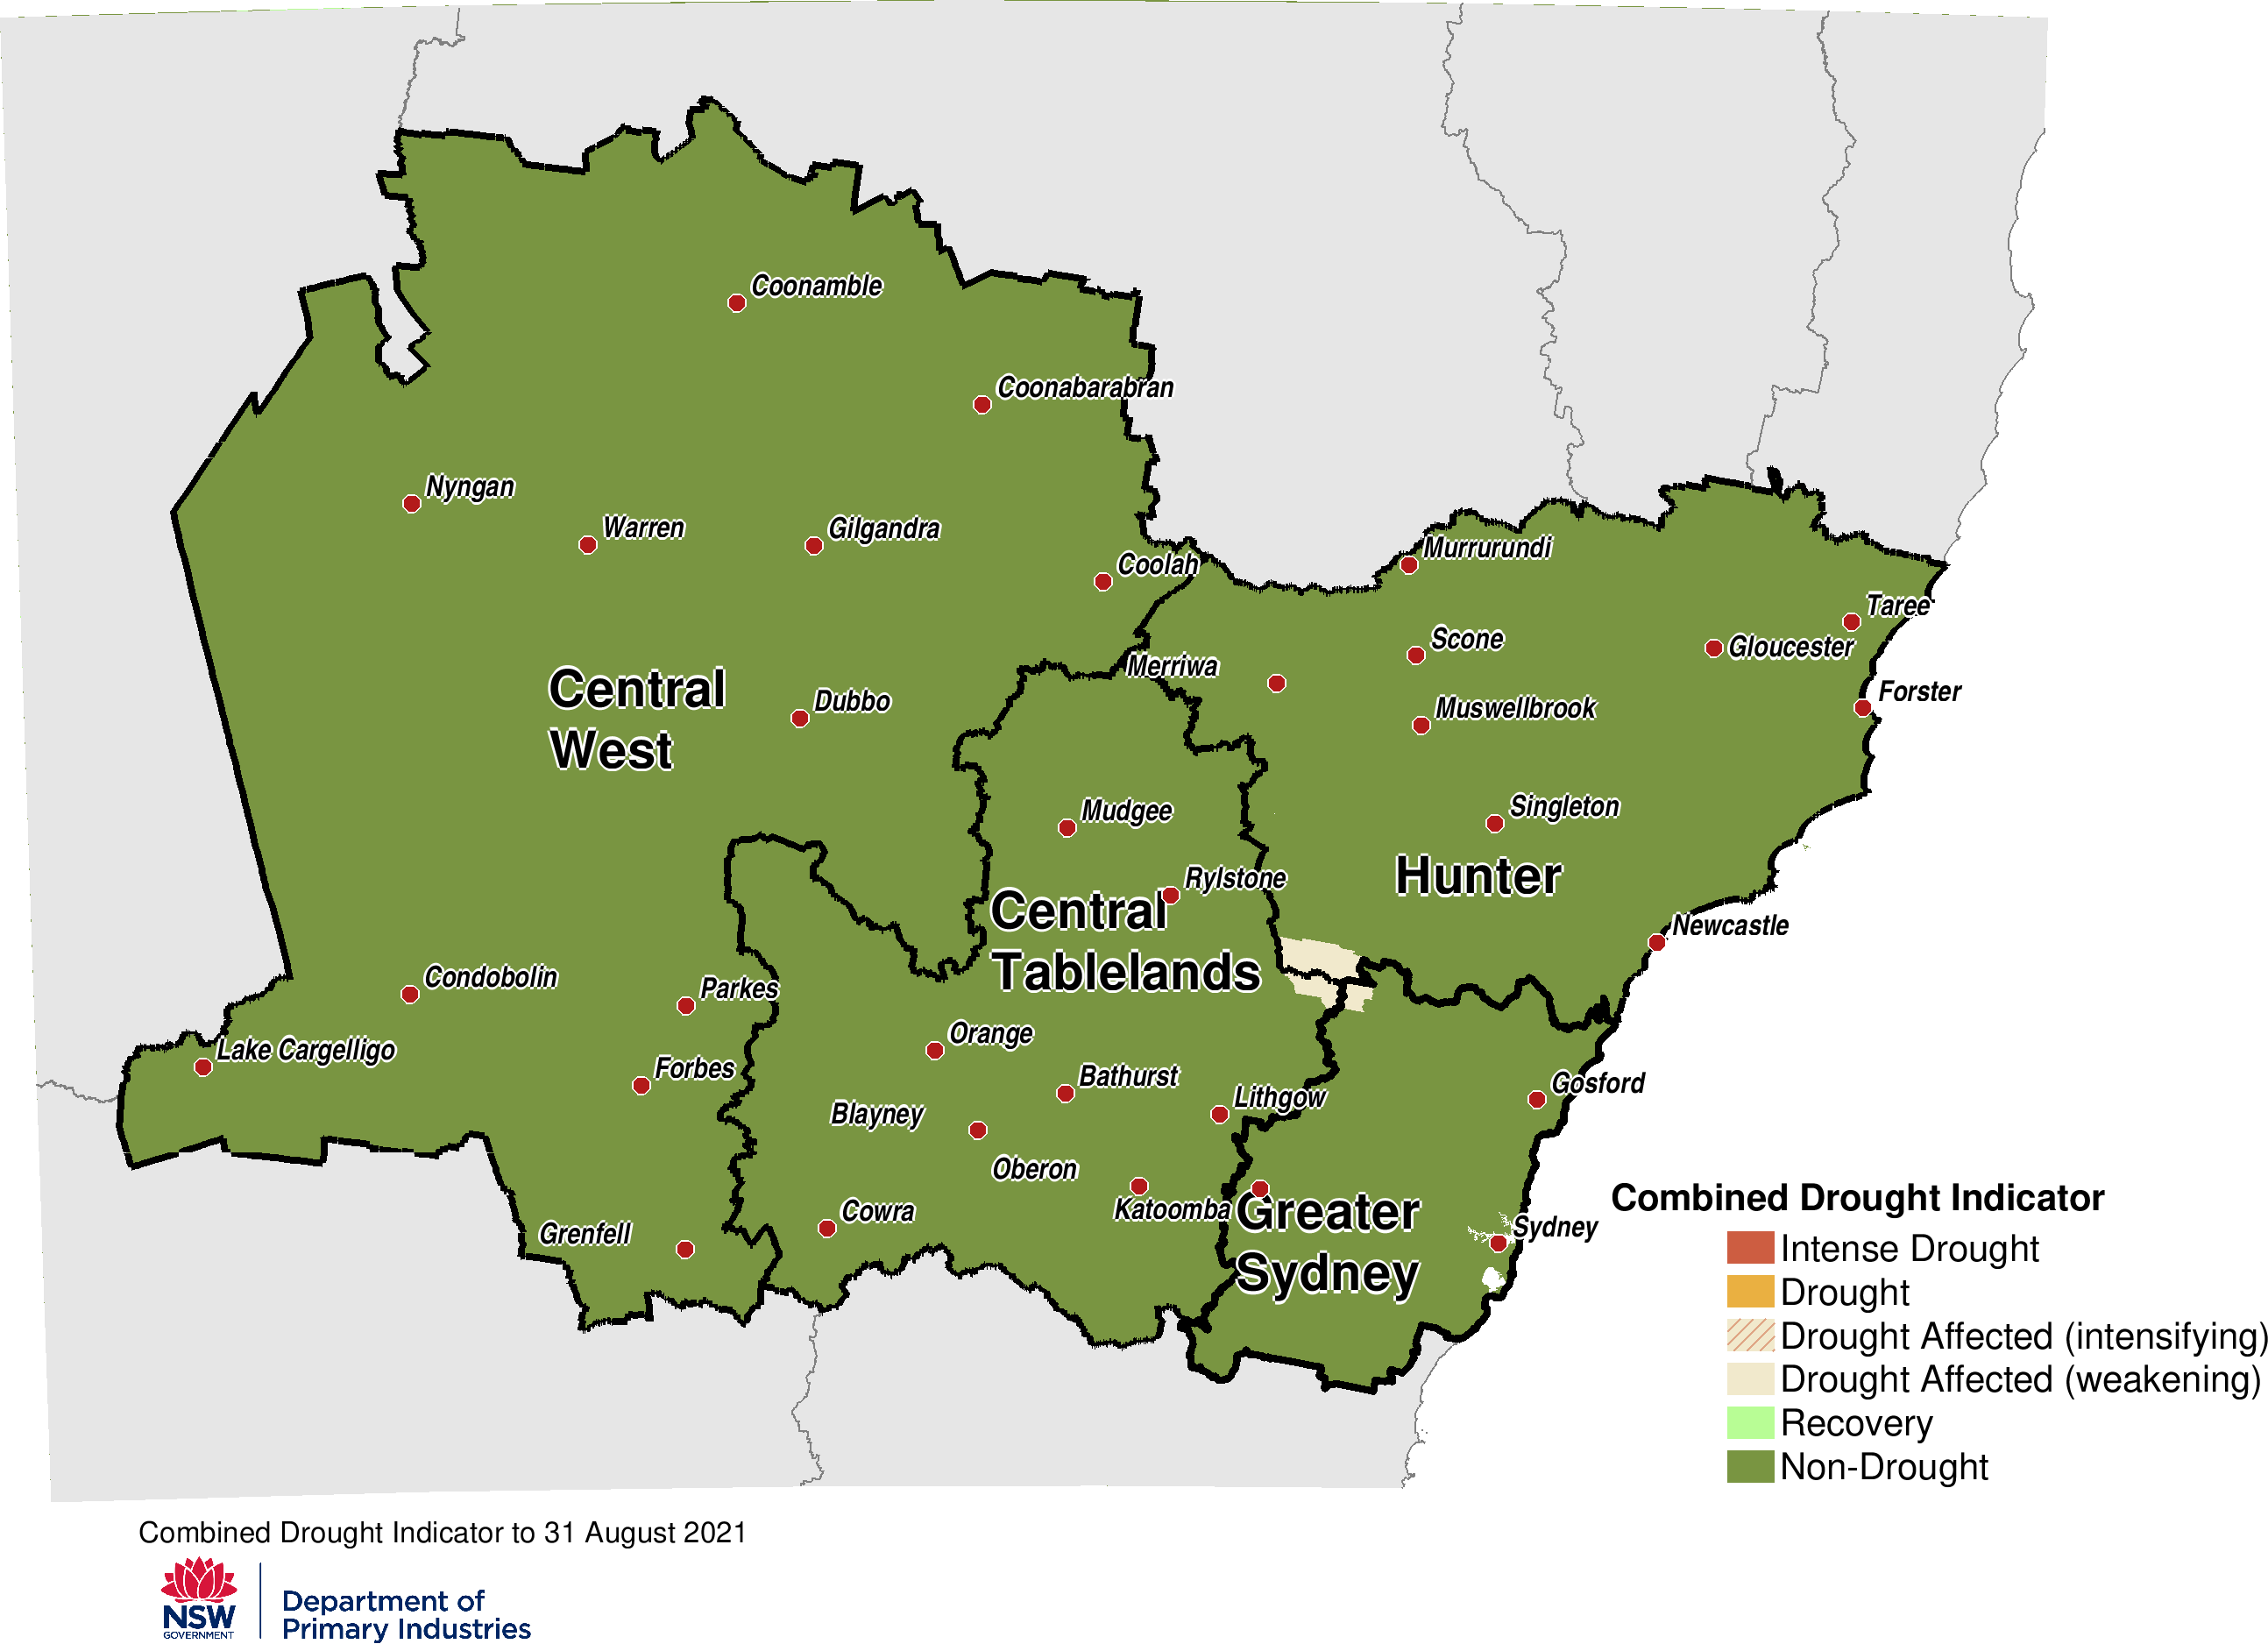 Combined Drought Indicator for the Central Tablelands, Central West, Hunter and Greater Sydney regions 